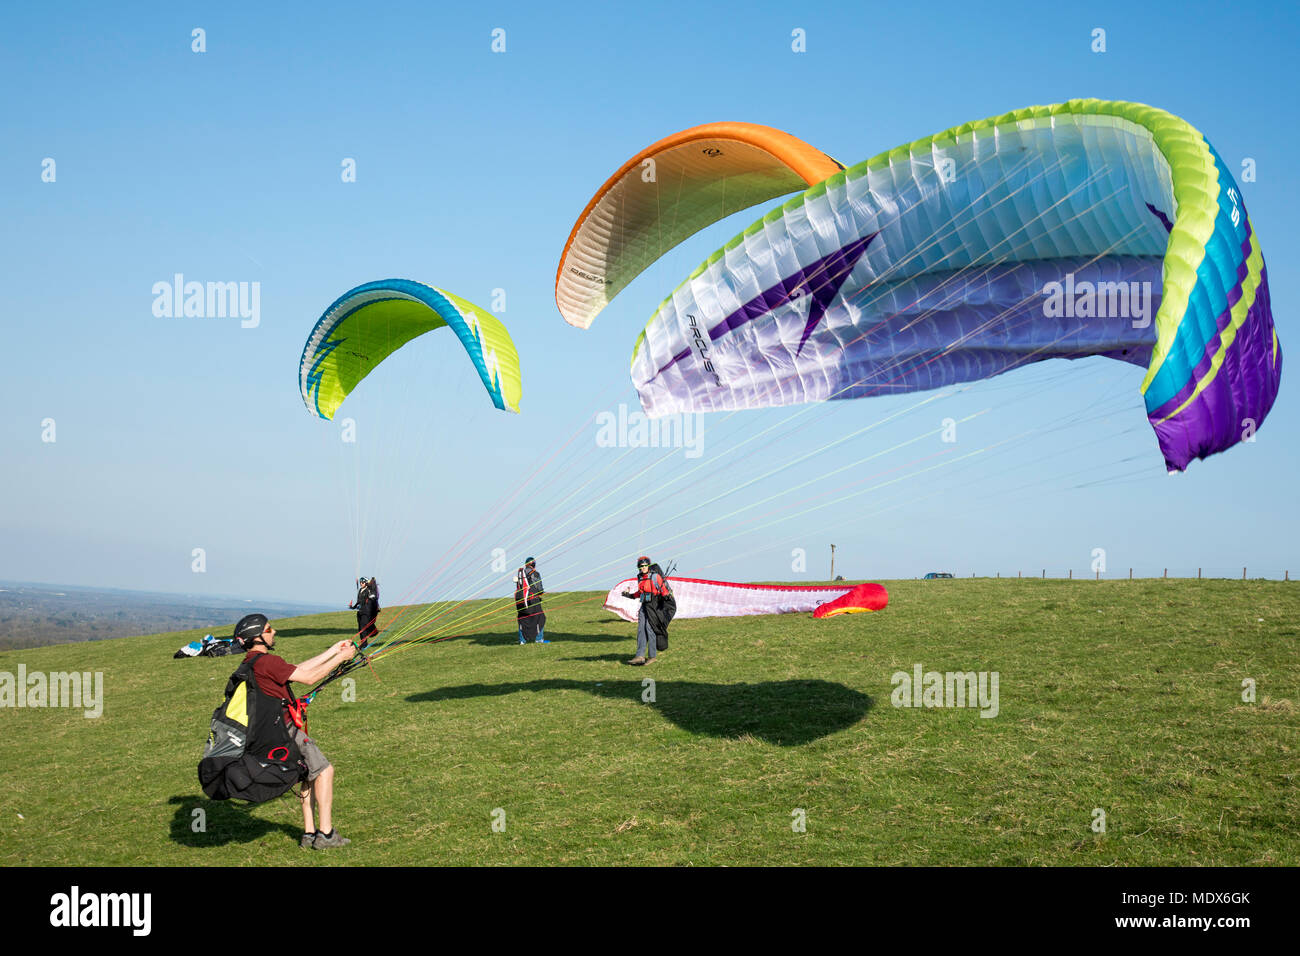 Waiting to fly, members of Thames Valley Hang-gliding Club on Combe Gibbet near Hungerford waiting for the perfect conditions to launch Credit: James Wadham / Alamy Live News Stock Photo